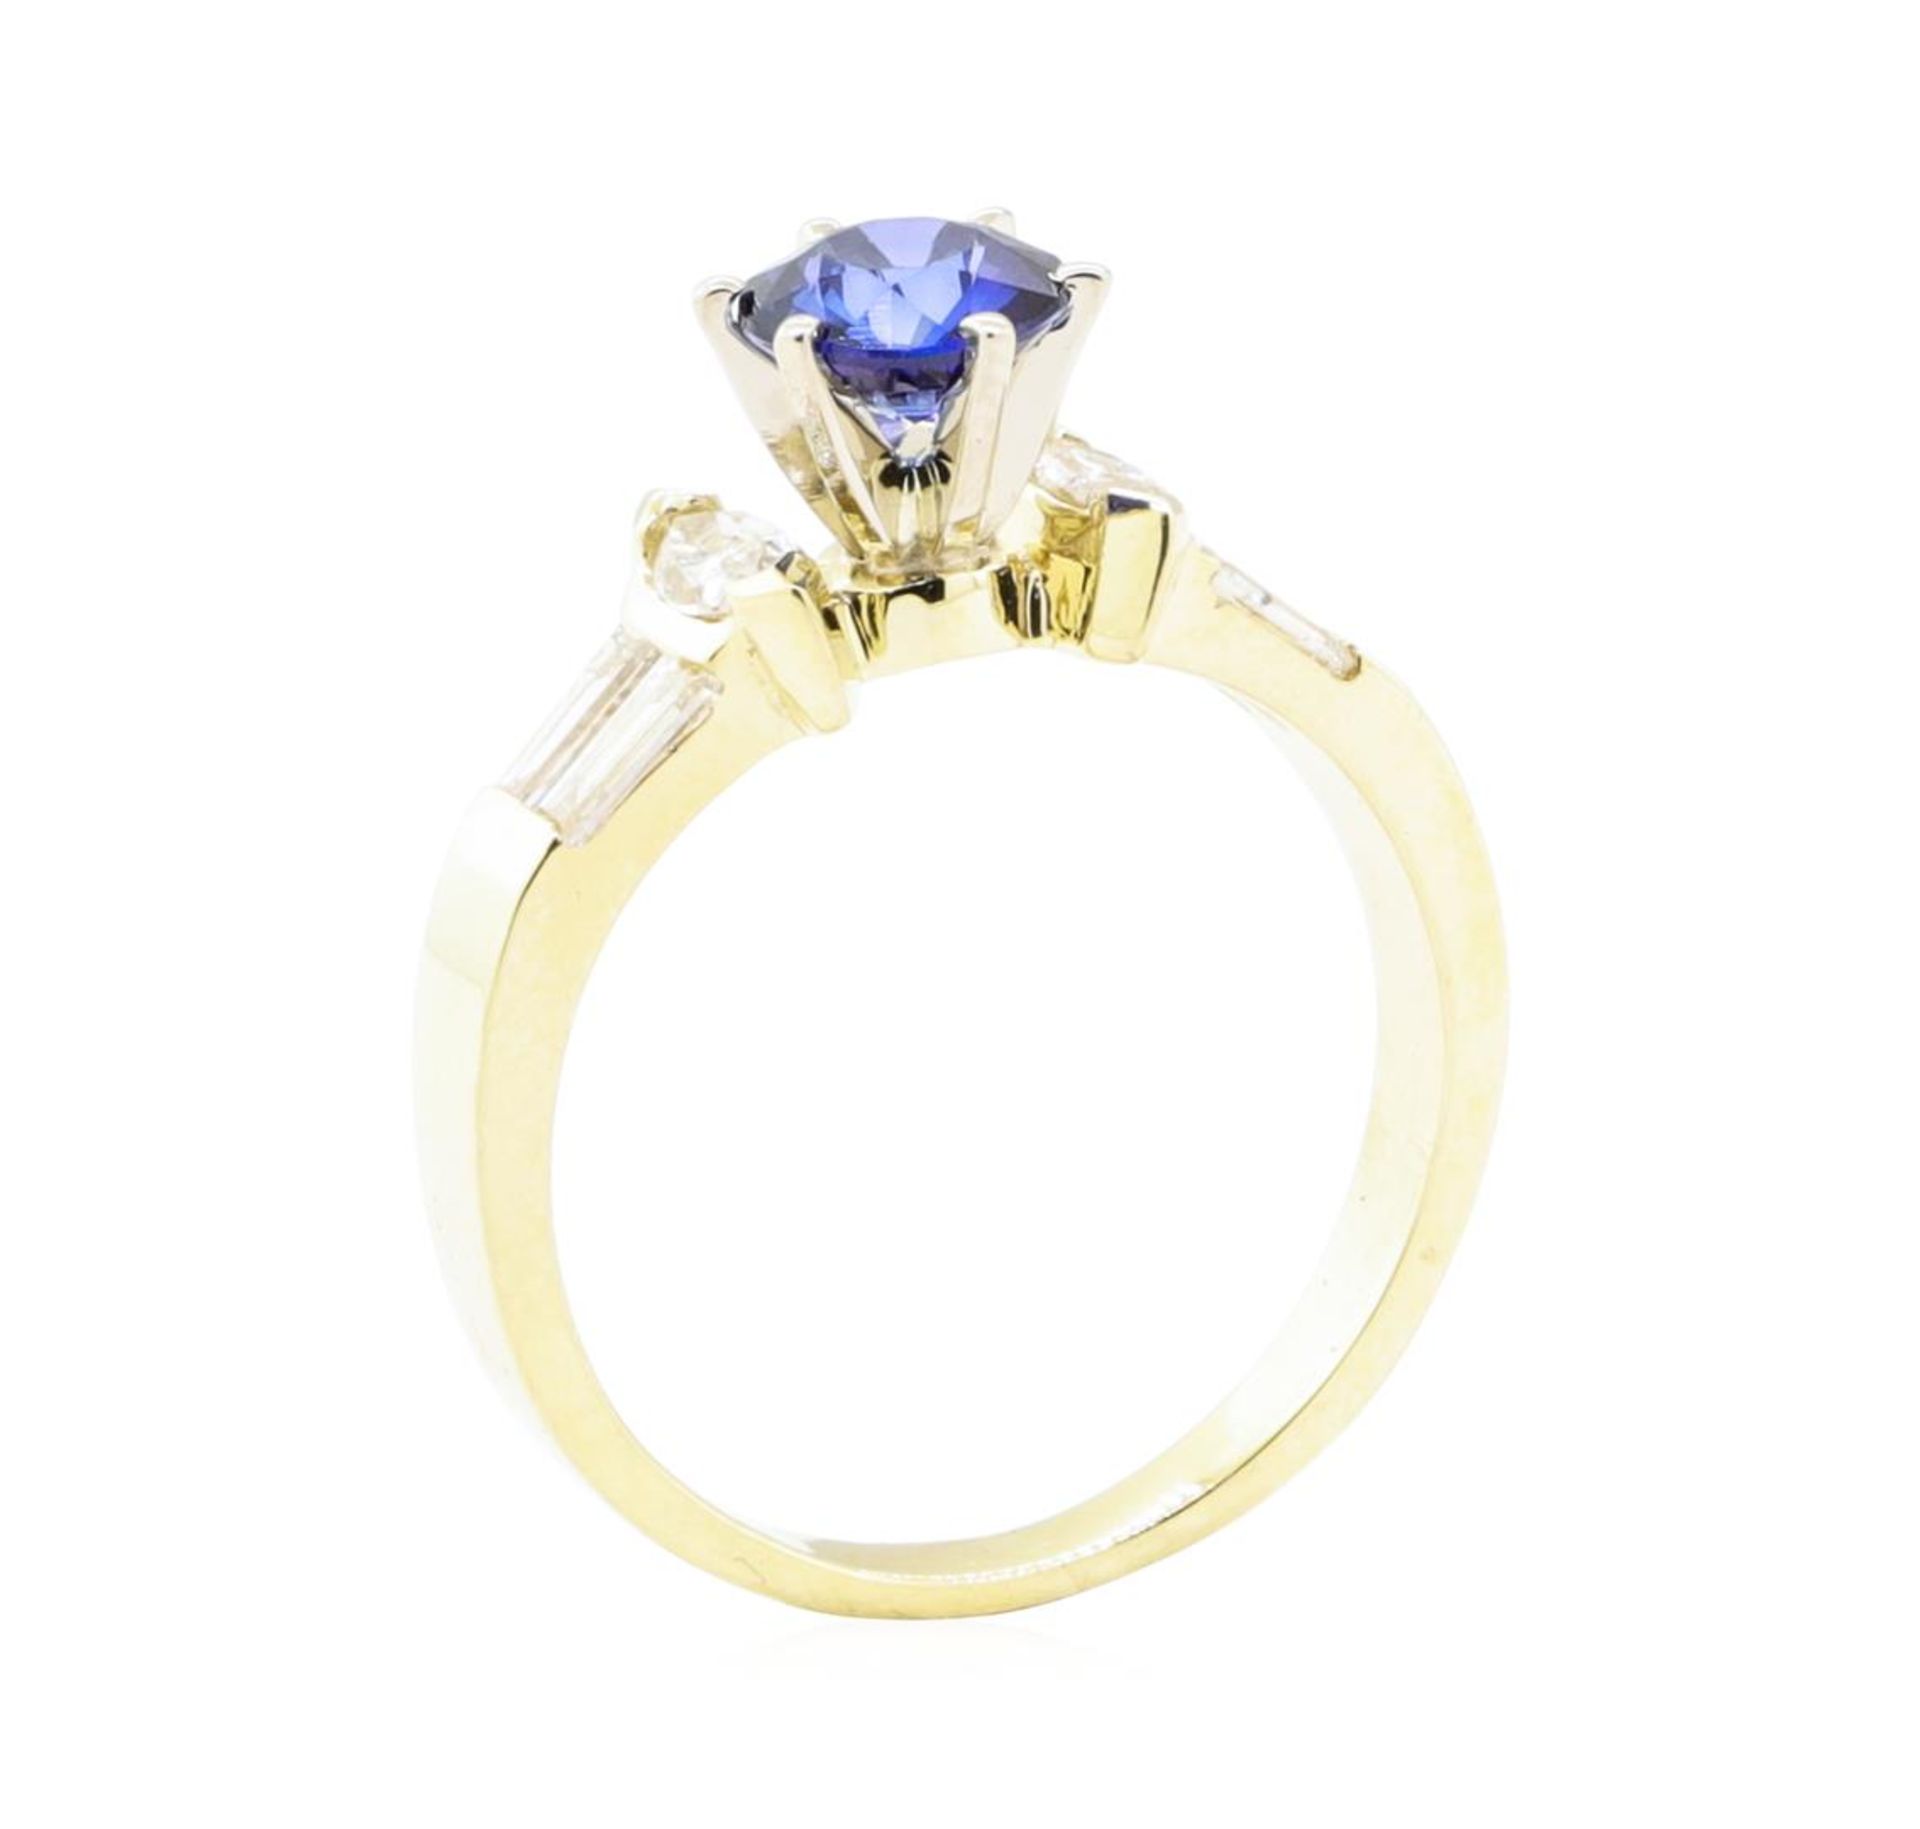 1.39ctw Sapphire and Diamond Ring - 14KT Yellow Gold - Image 4 of 4